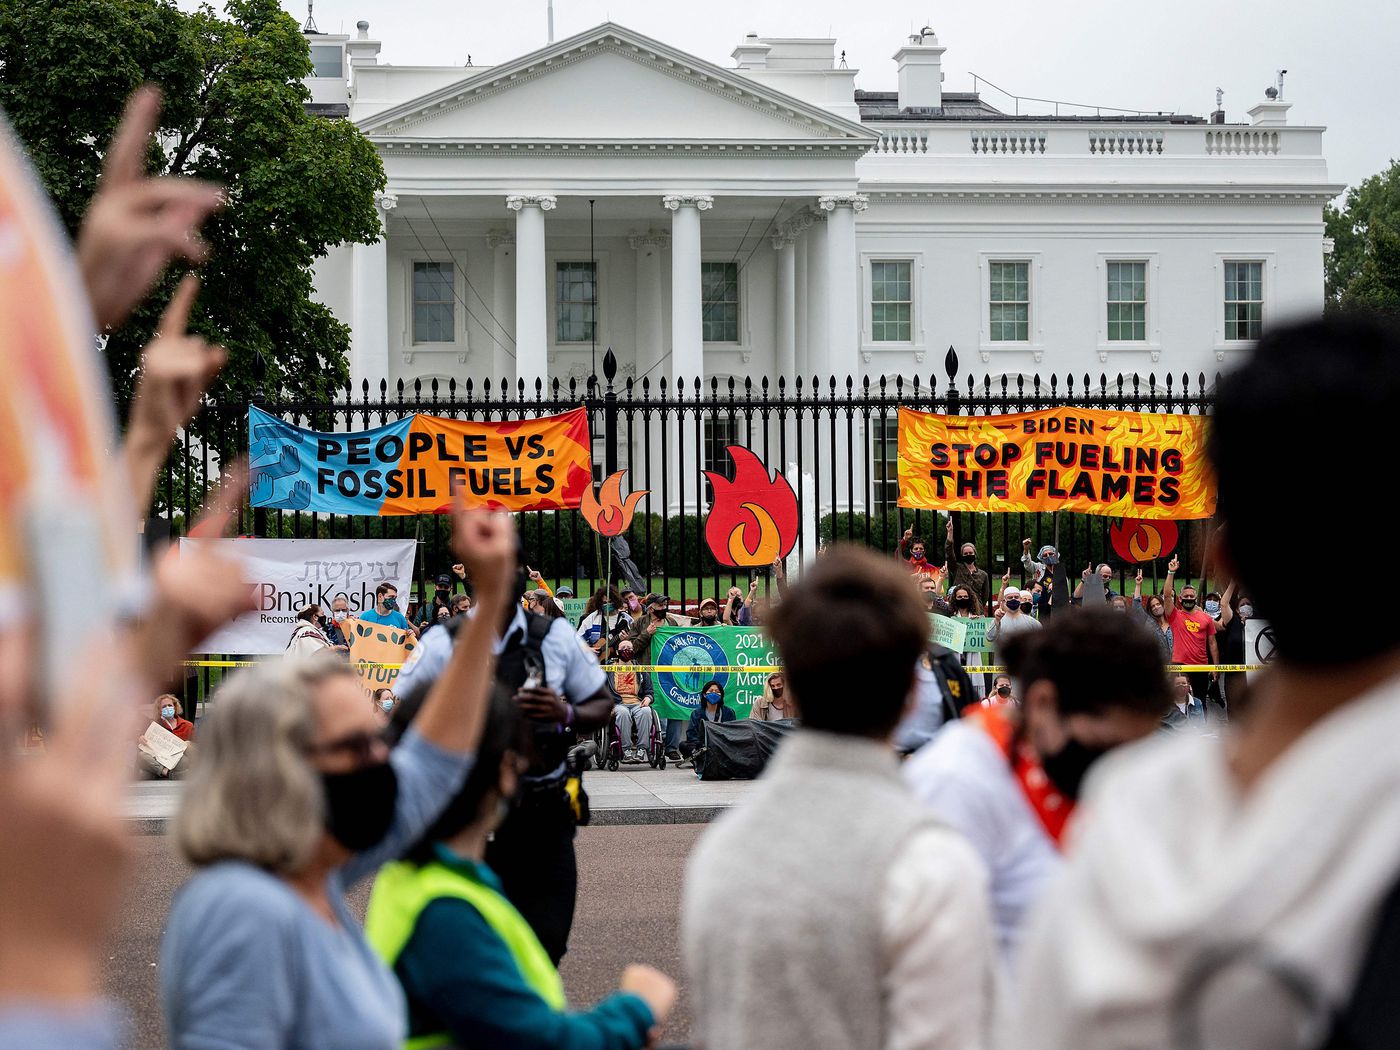 Demonstrators chant in front of the White House during a climate march on October 12, 2021.